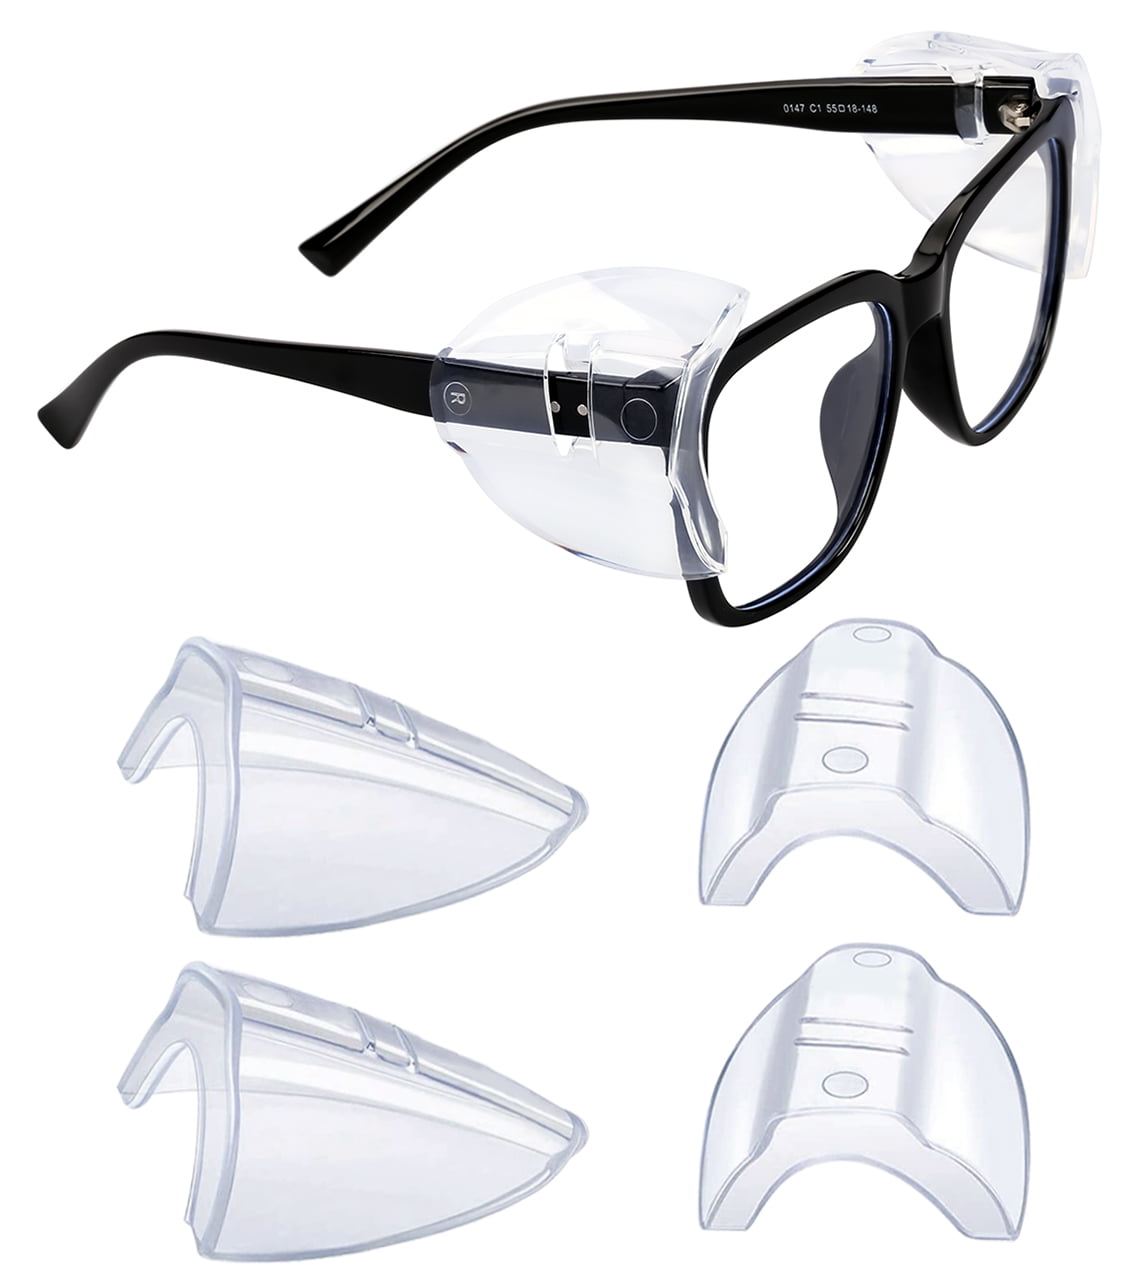 Censgo 2 Pairs Side Shields For Glasses Eye Protection Clear Shields Slip On Safety Glasses